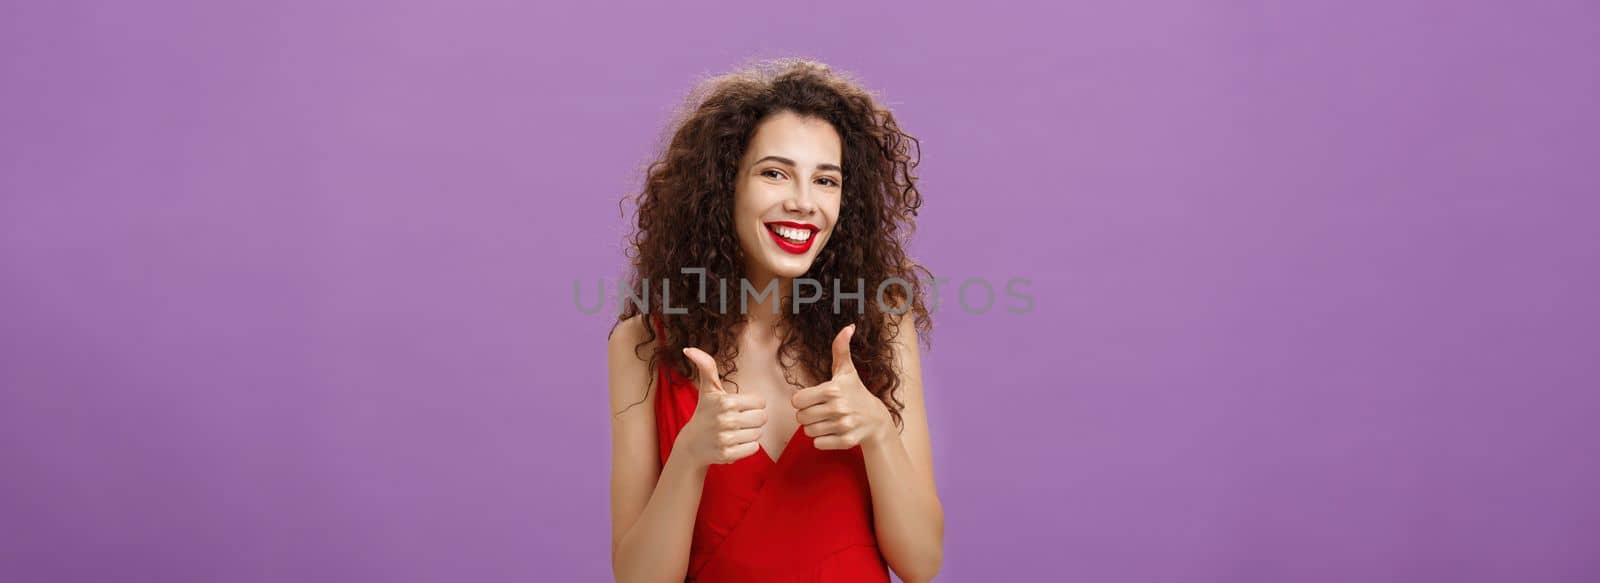 Supportive girlfriend giving thumbs up to decision of boyfriend move in. Friendly-looking tender charming woman with curly hairstyle in red dress giving approval and smiling over purple background.